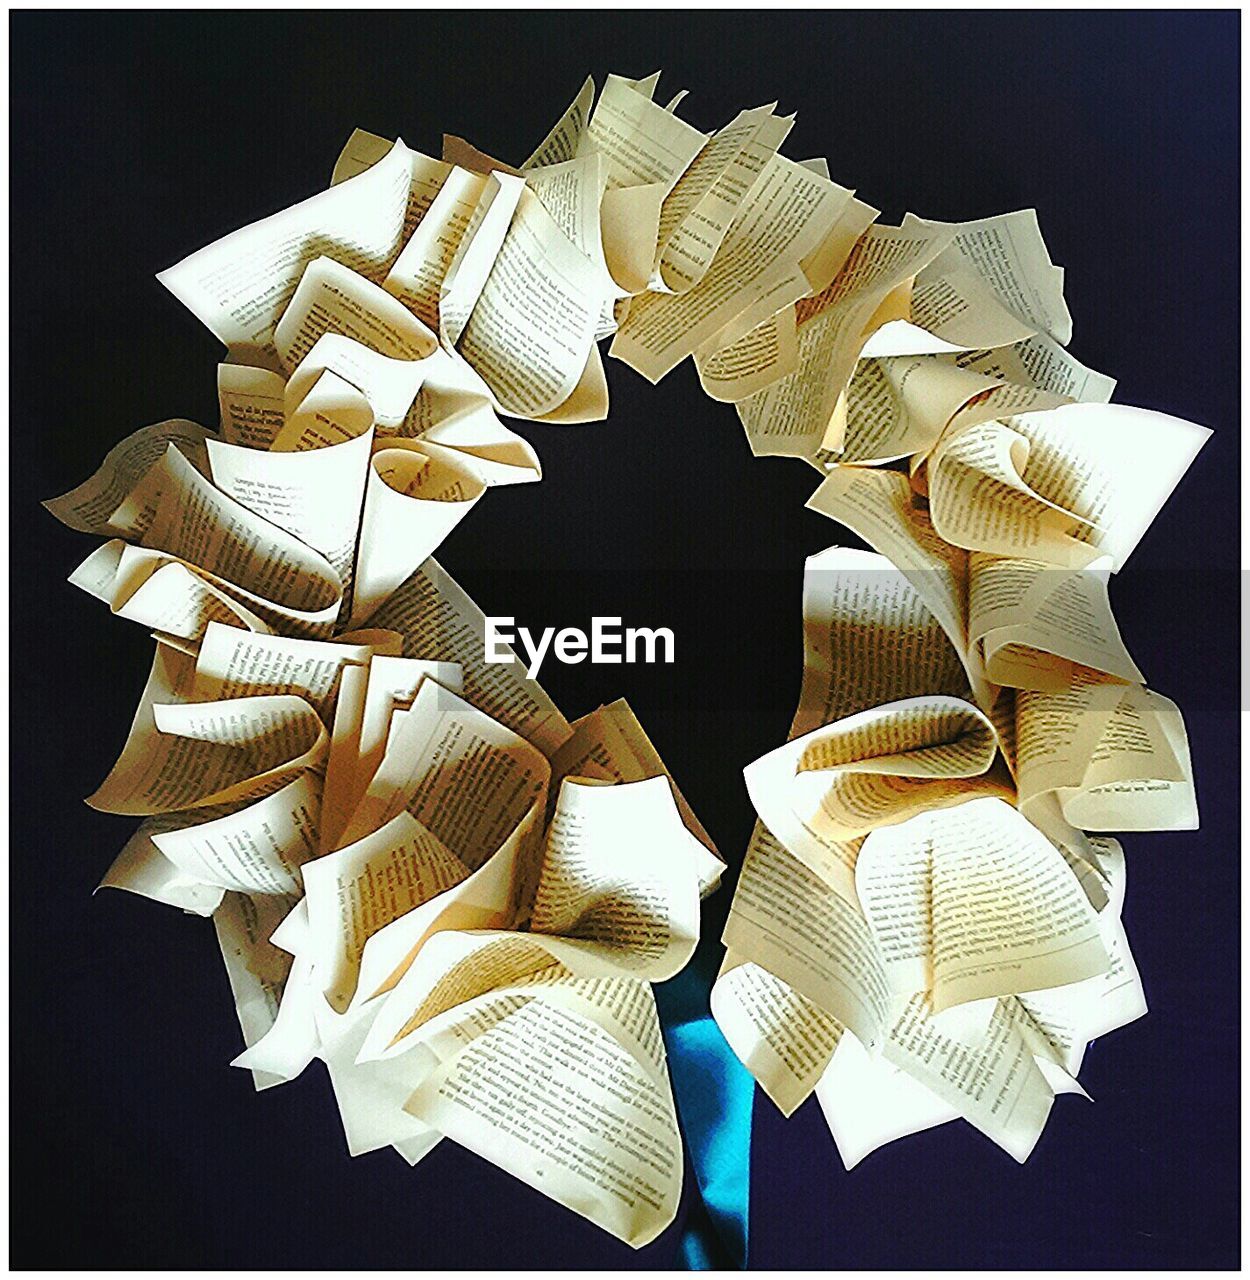 Circle made from folded papers against black background